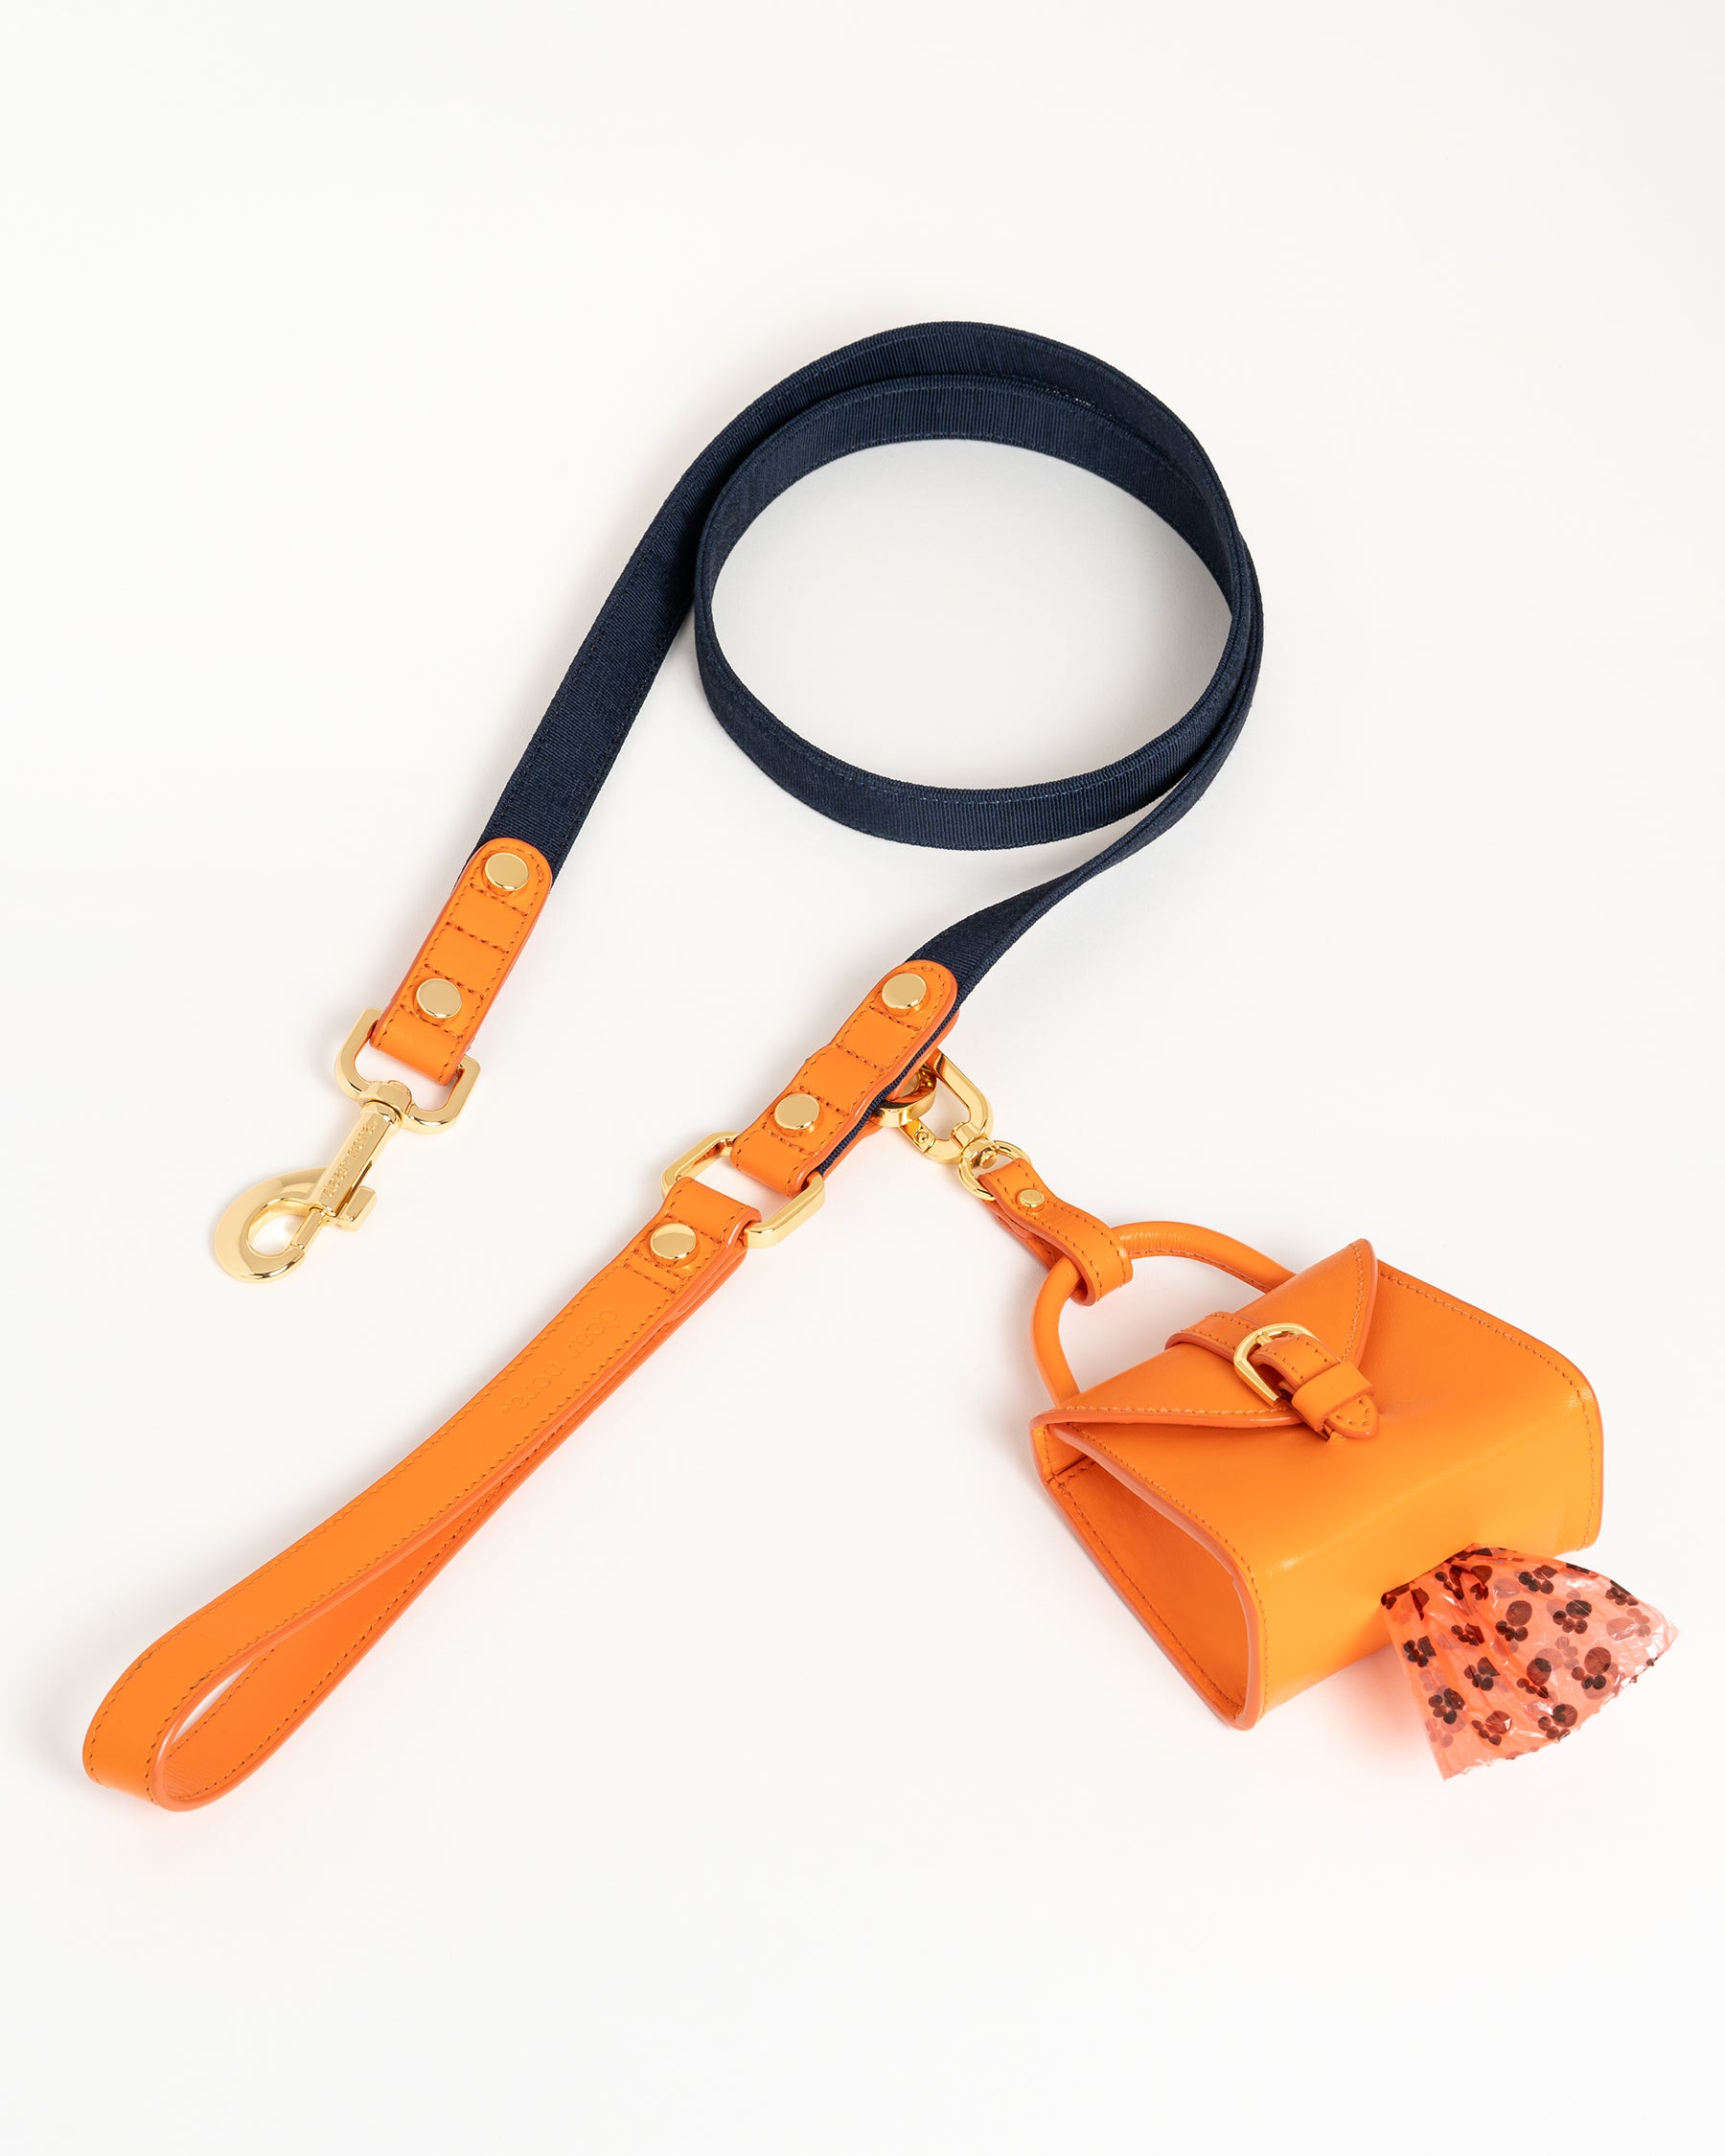 Dear Nora Tangerine dog leash and poop bag holder - orange leather, navy blue fabric and 24k plated hardware - top down shot